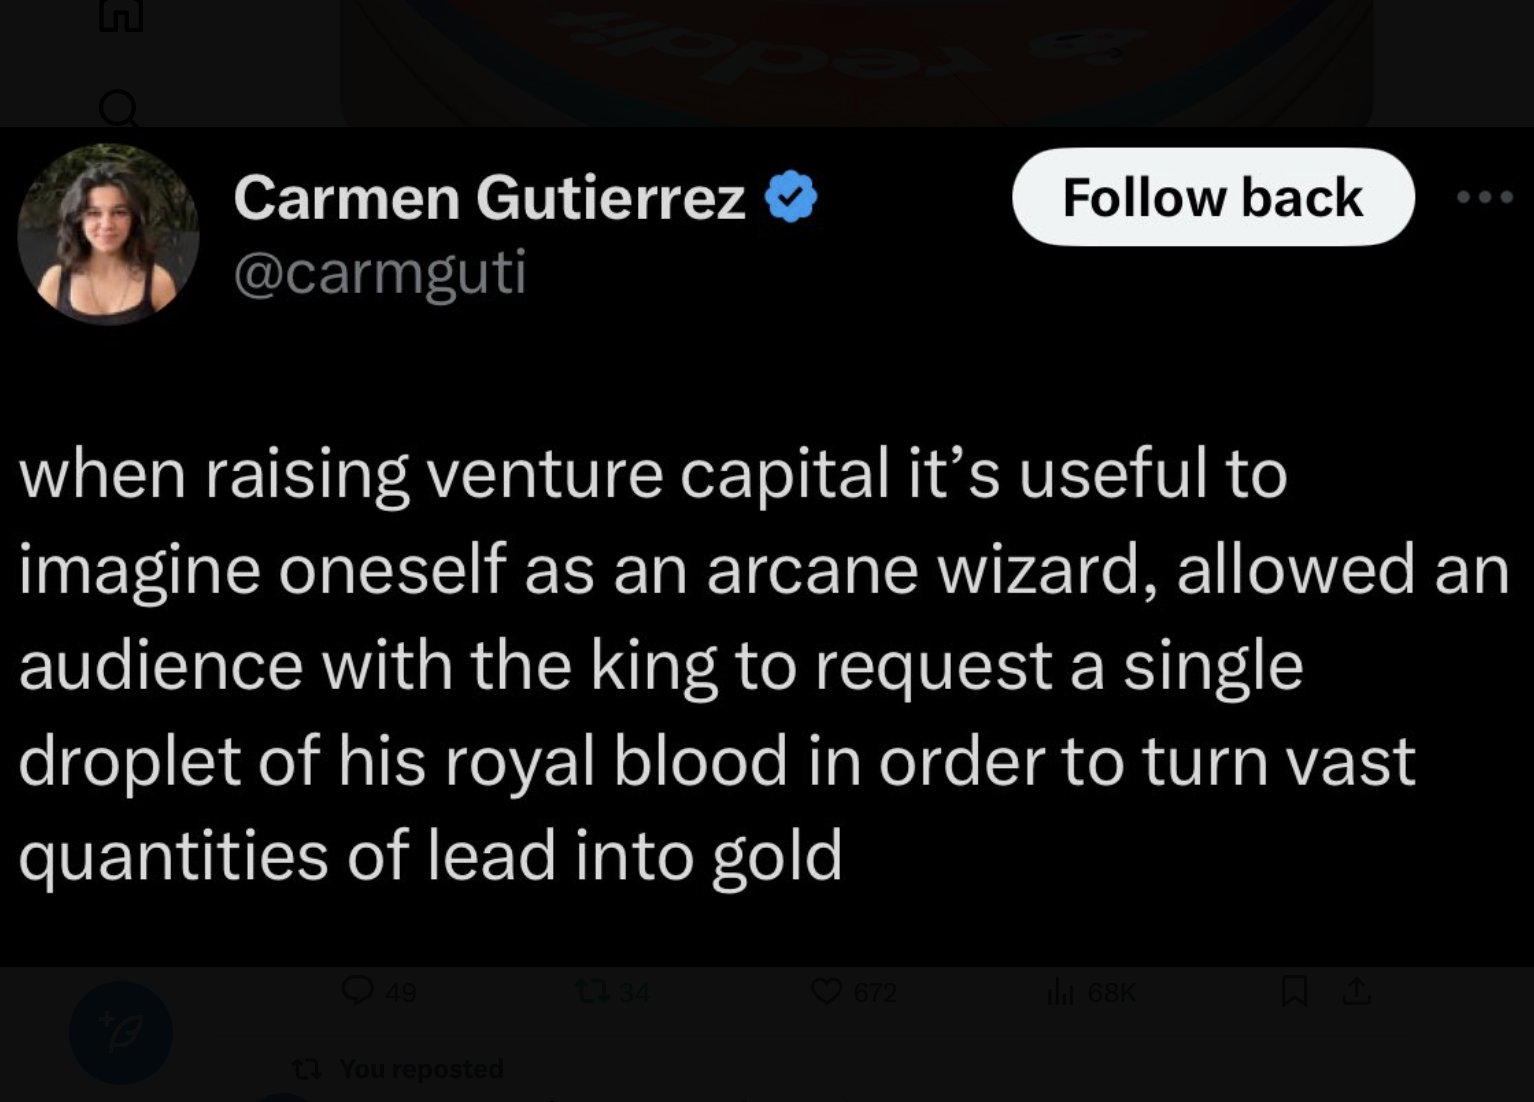 screenshot - Carmen Gutierrez back when raising venture capital it's useful to imagine oneself as an arcane wizard, allowed an audience with the king to request a single droplet of his royal blood in order to turn vast quantities of lead into gold 49 1334